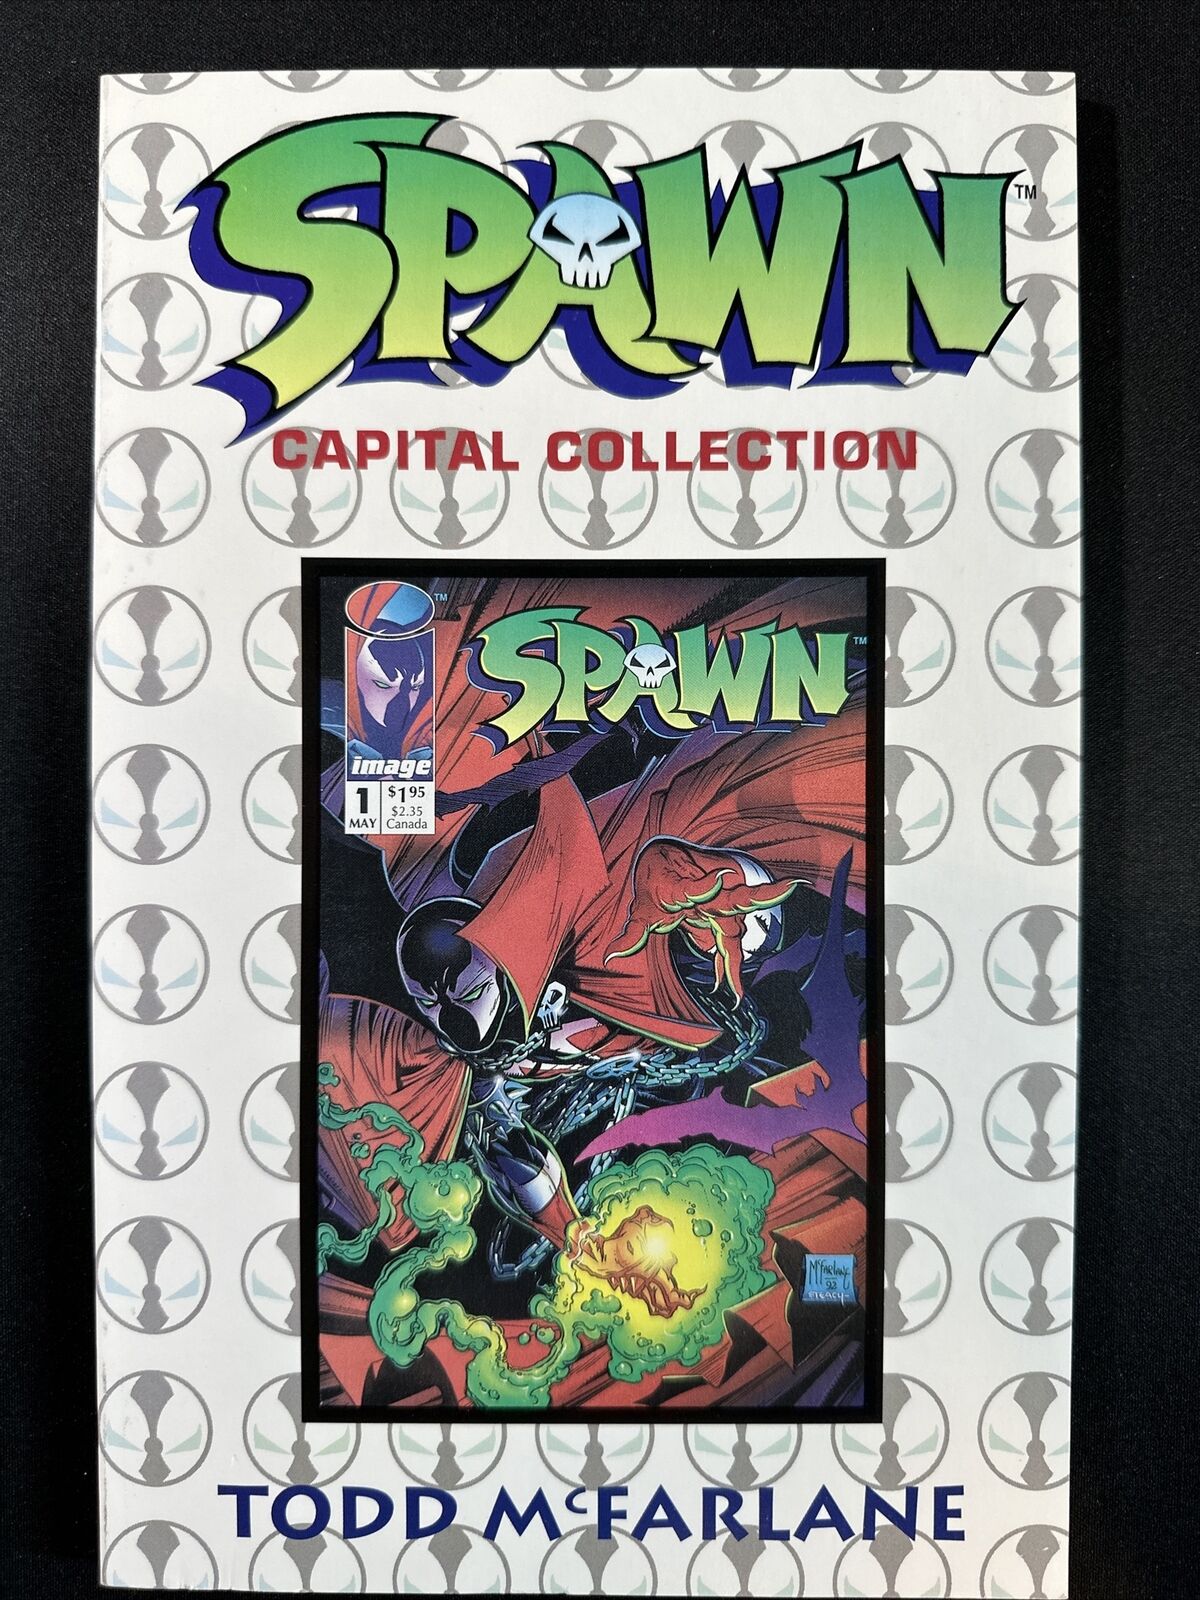 Spawn #1 Capital Collection #/1200 TPB 1st Low Print SIGNED Mcfarlane VF/NM